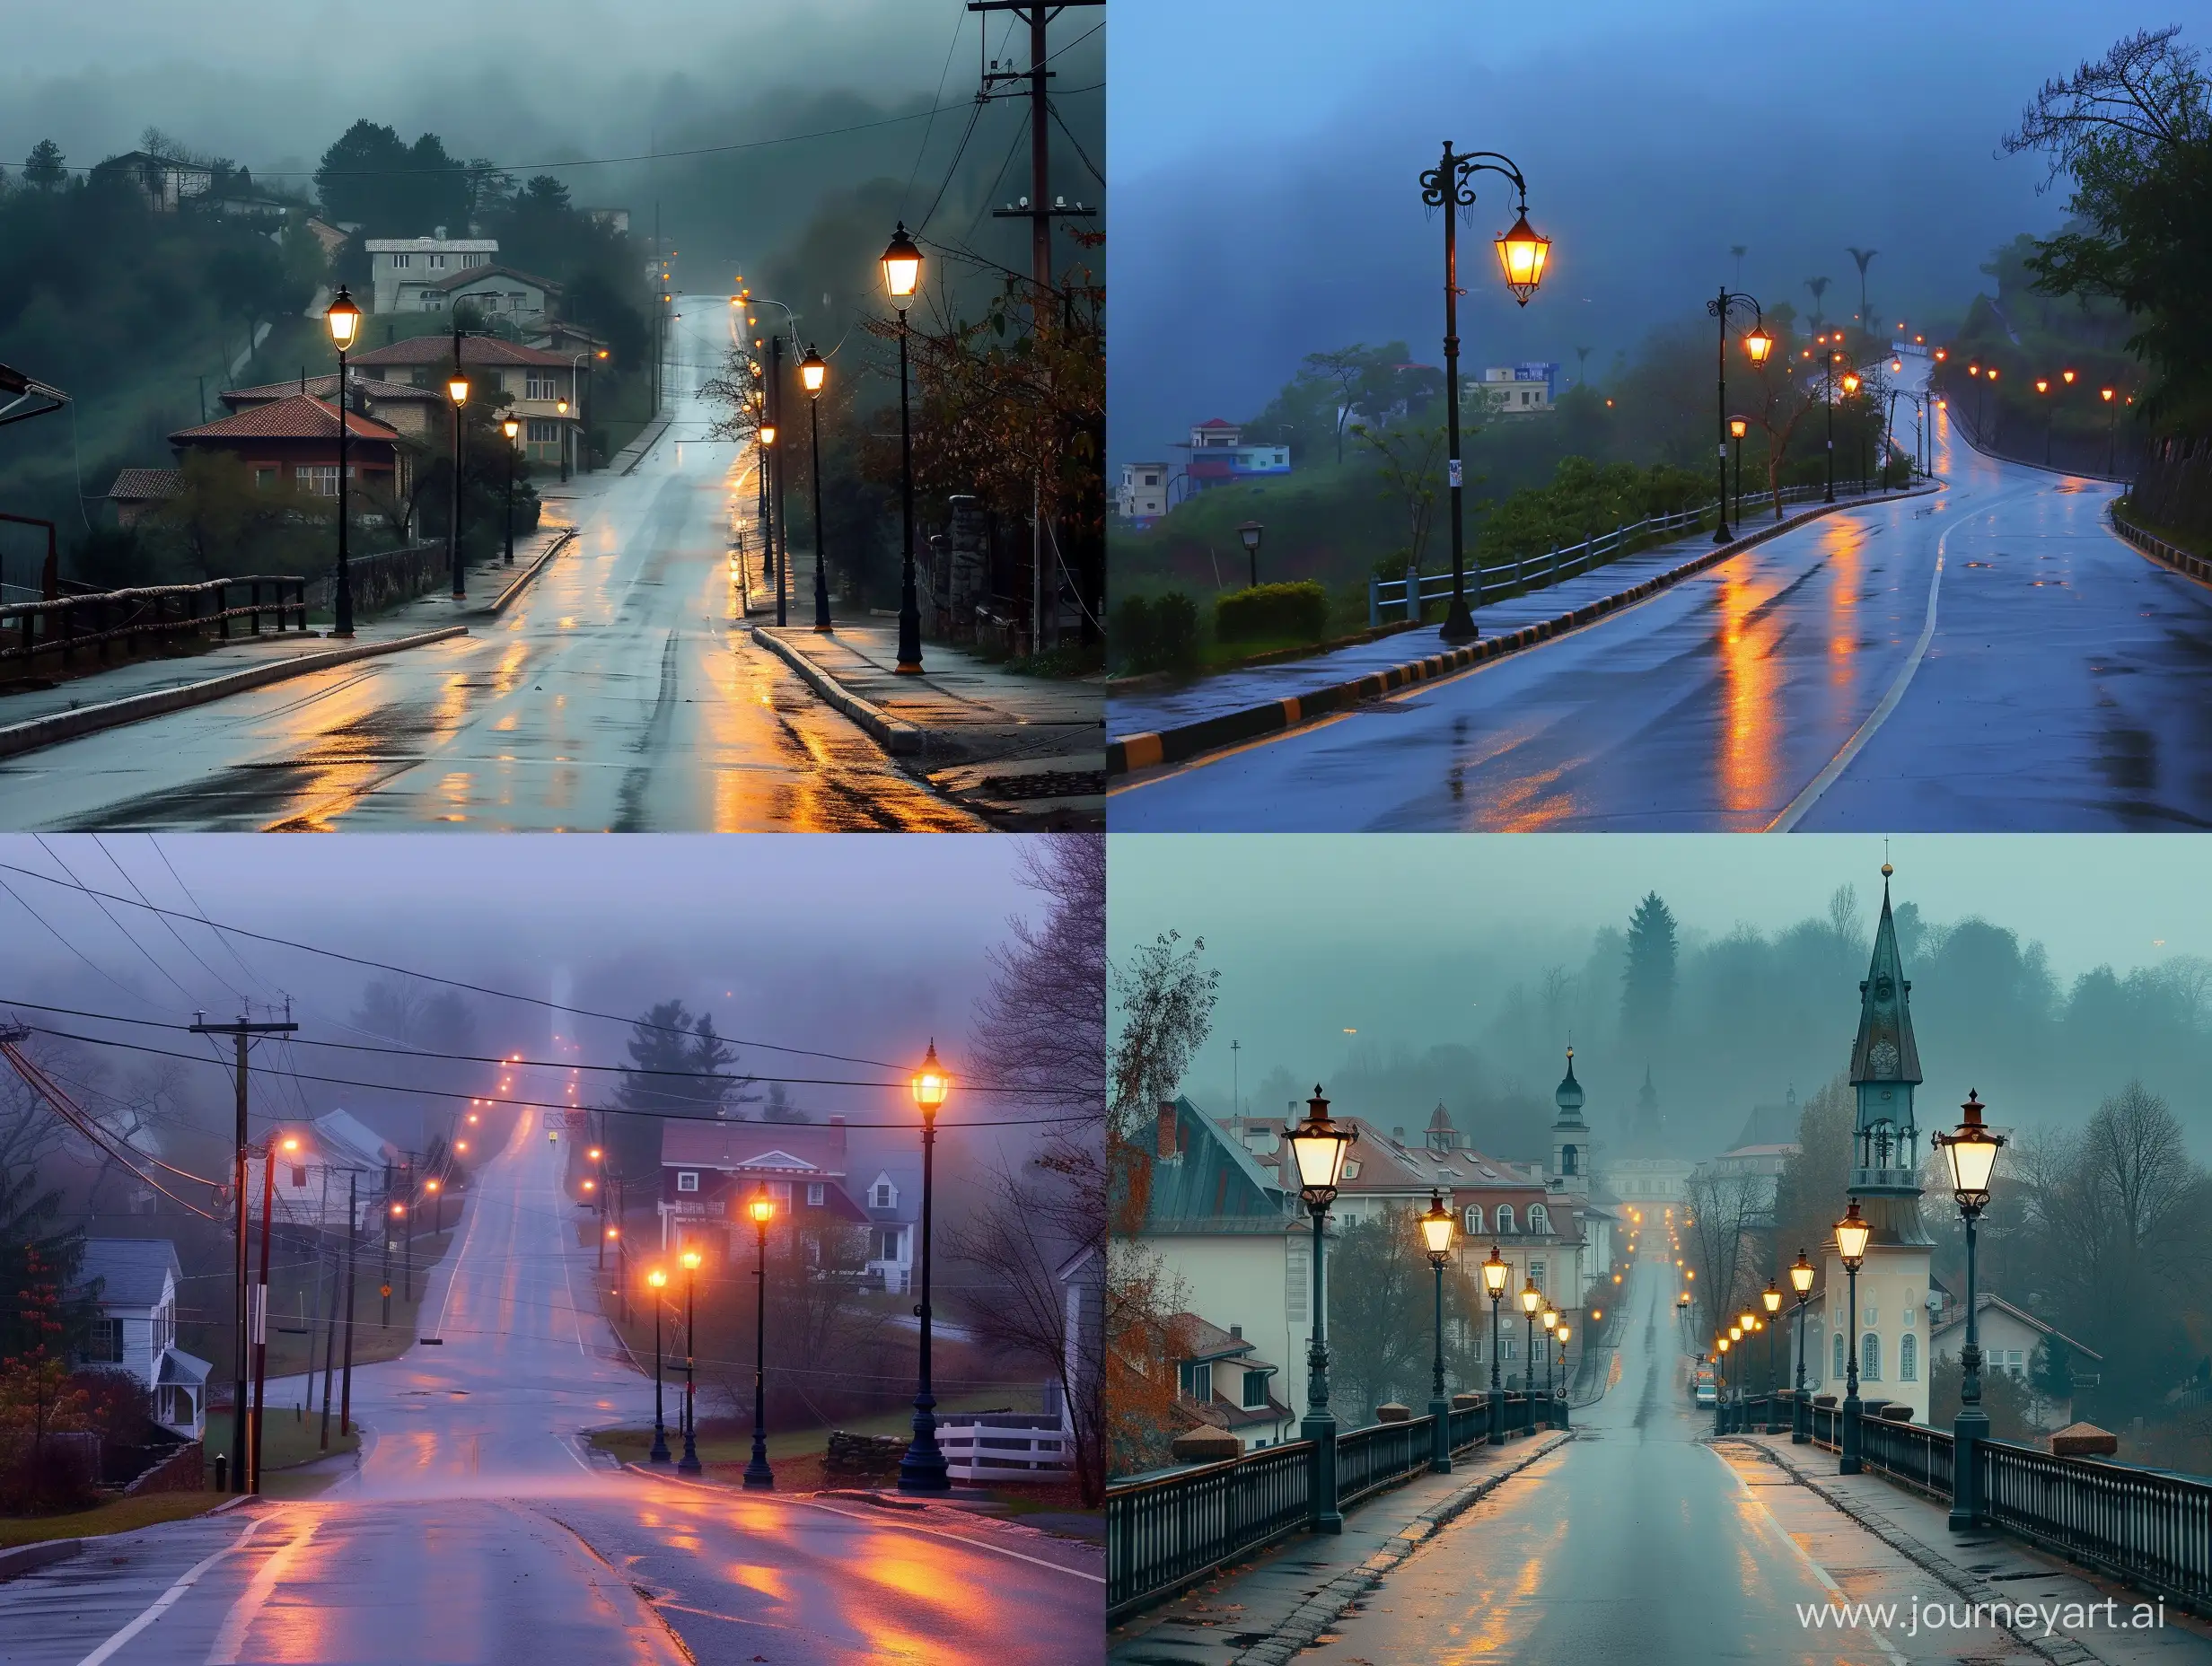 town, early morning, road, rain, street lamps

